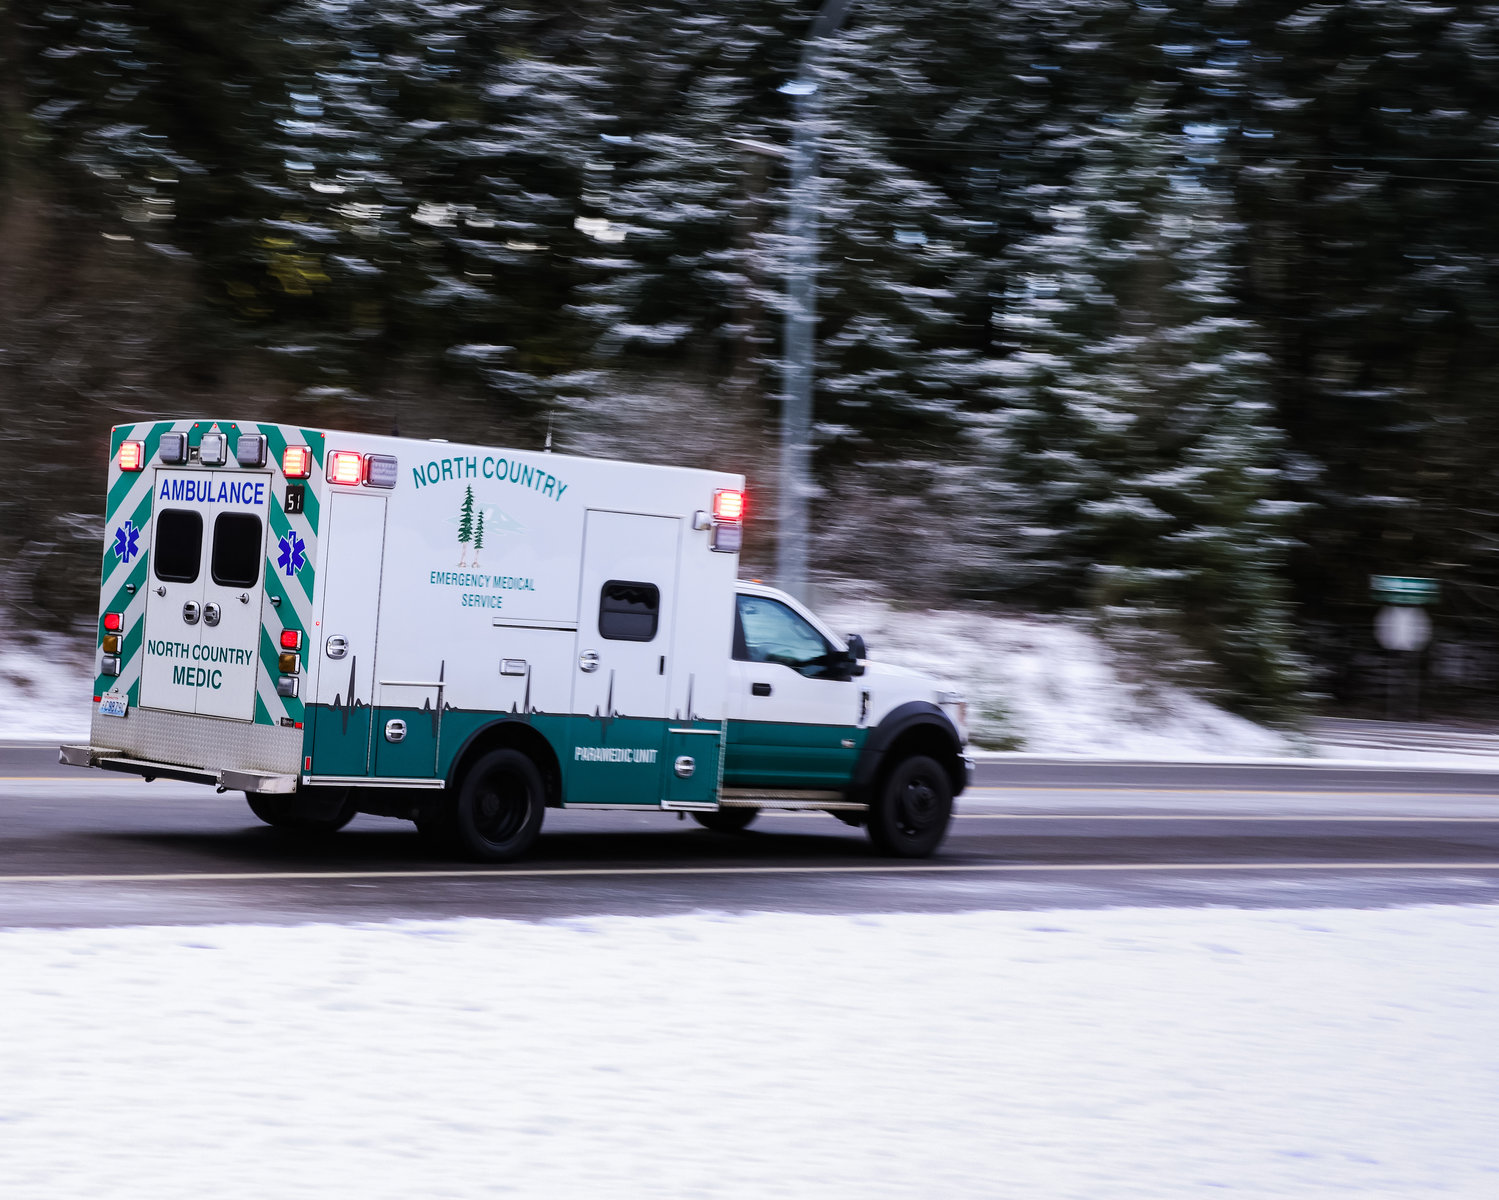 North Country Medic 51 travels down state Route 503 after responding to a weather-related accident HWY 503 near Northeast Lucia Falls Road. The call came out at 7:43 a.m. on Thursday, Feb. 23, and the transport was completed over an hour later due to icy road conditions.